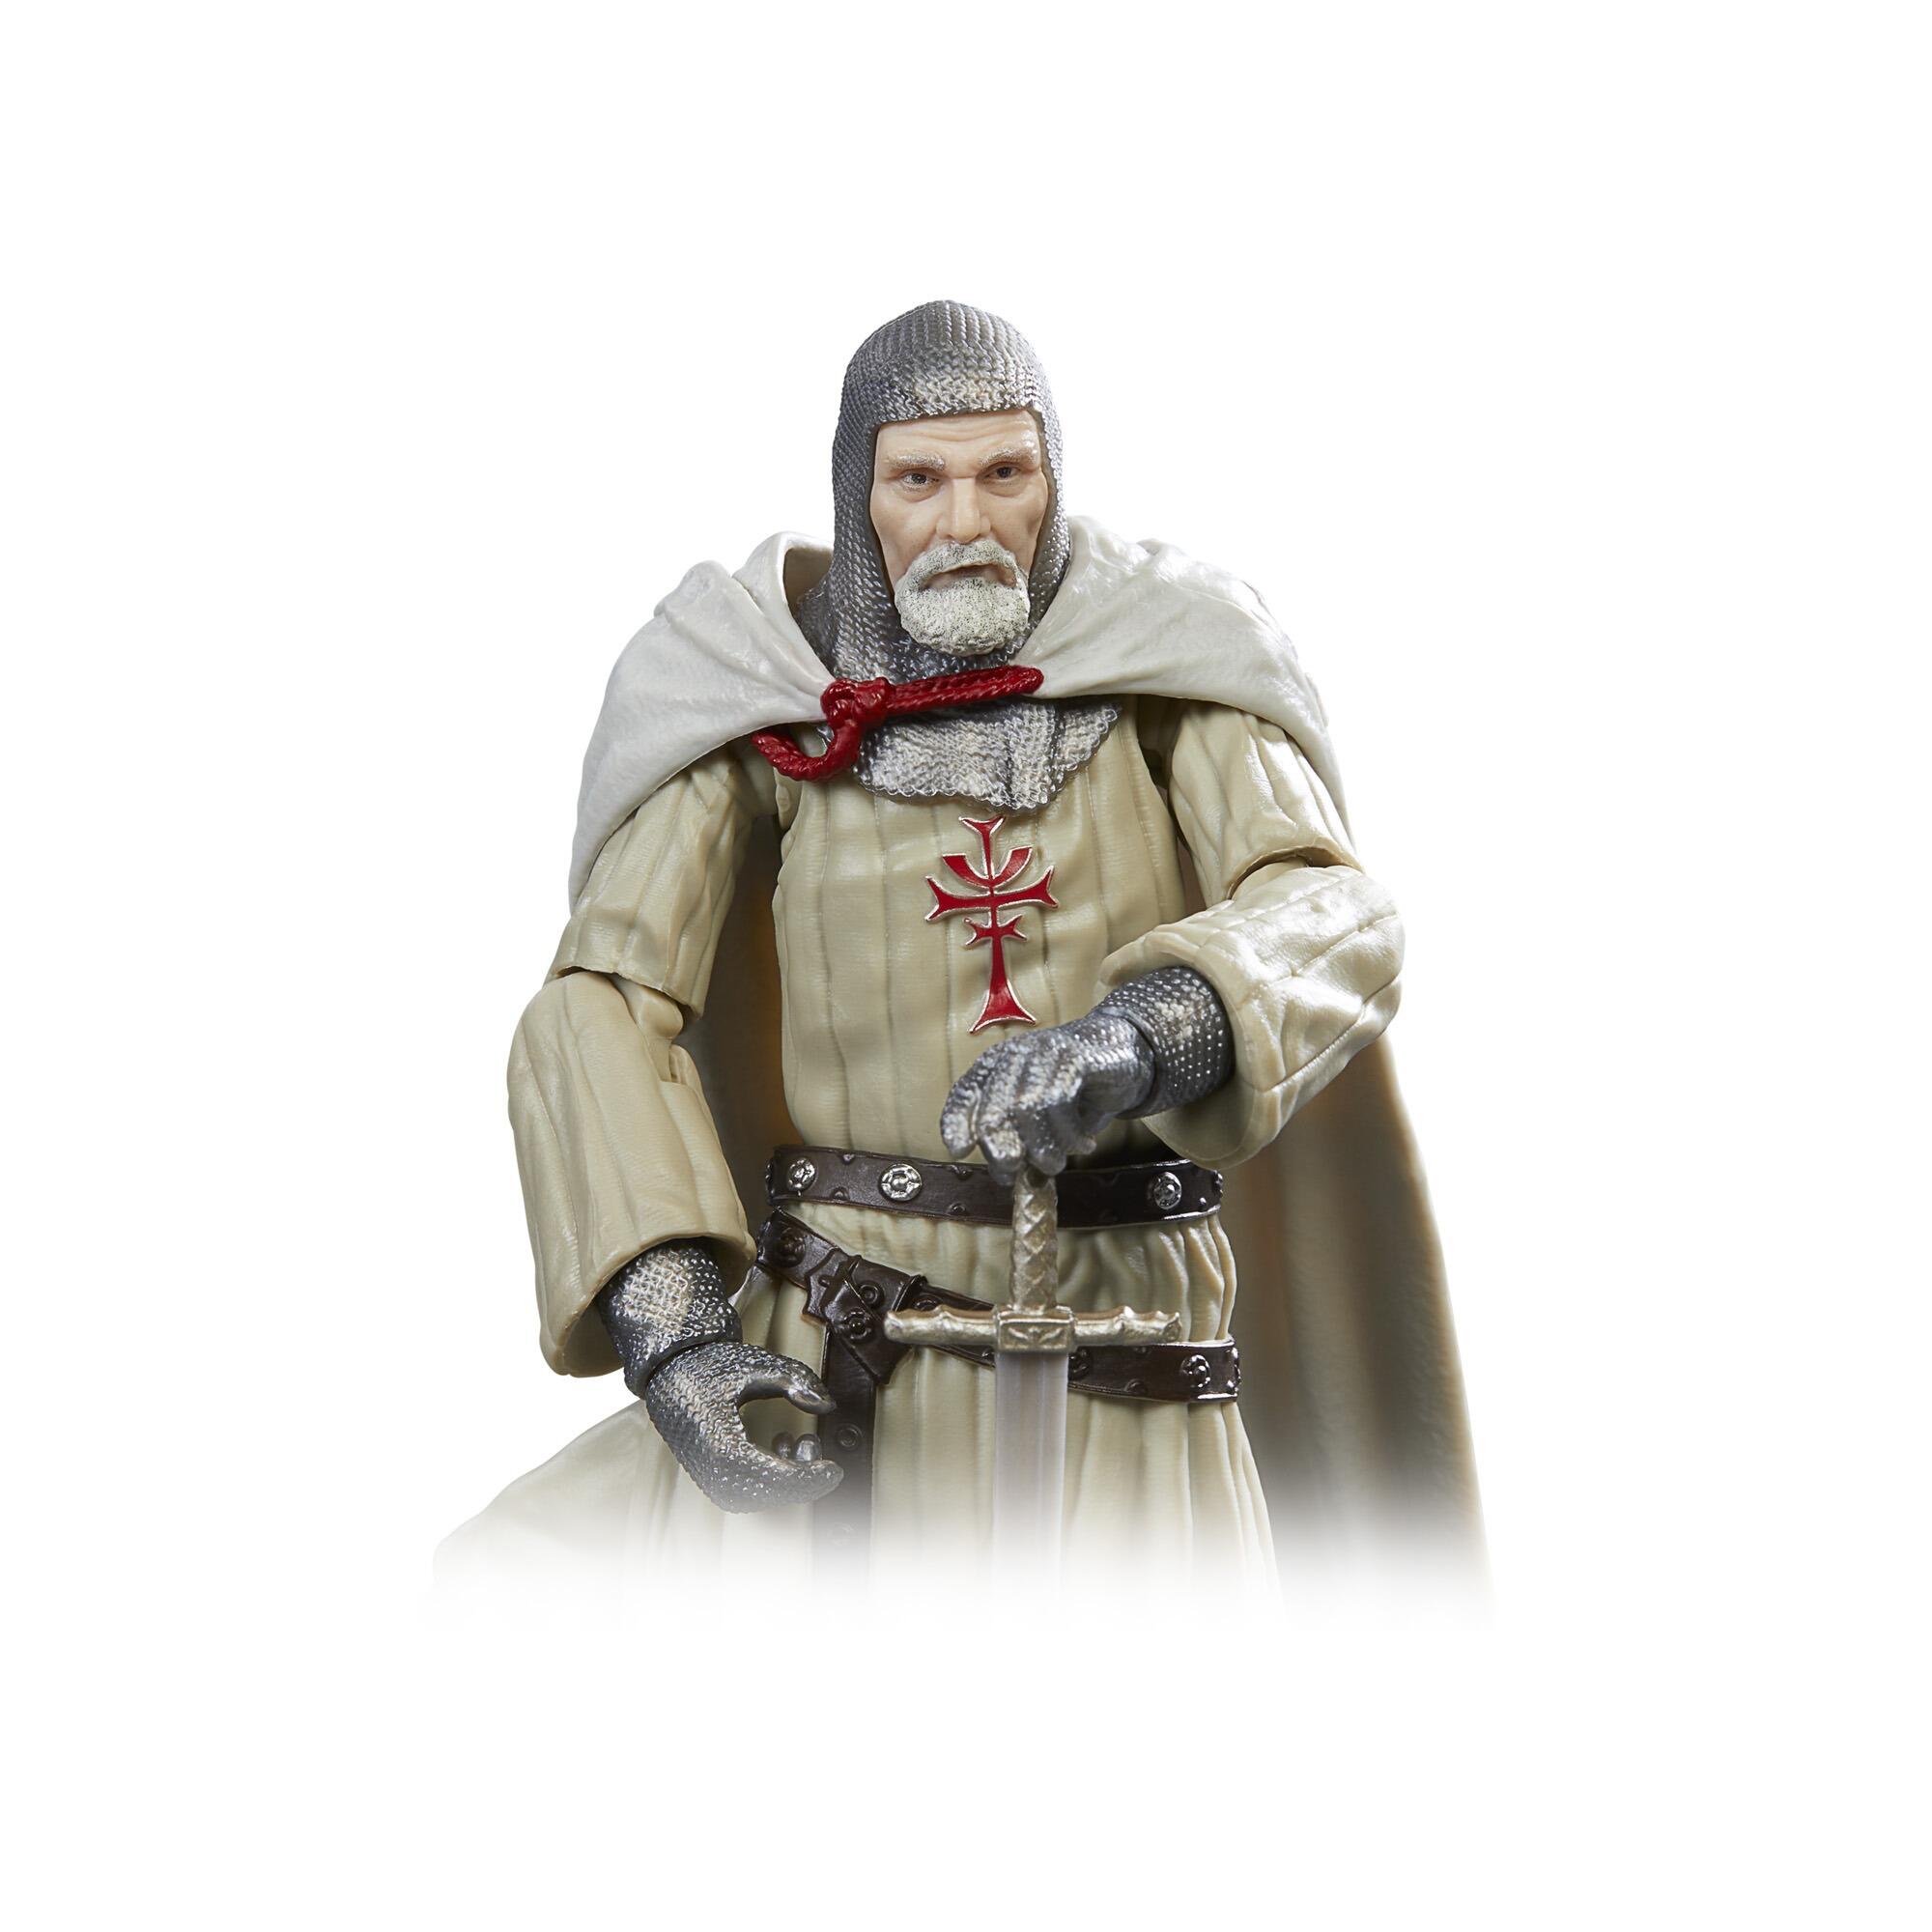 Indiana Jones 6 Inch Action Figure Wave 3 - Grail Knight